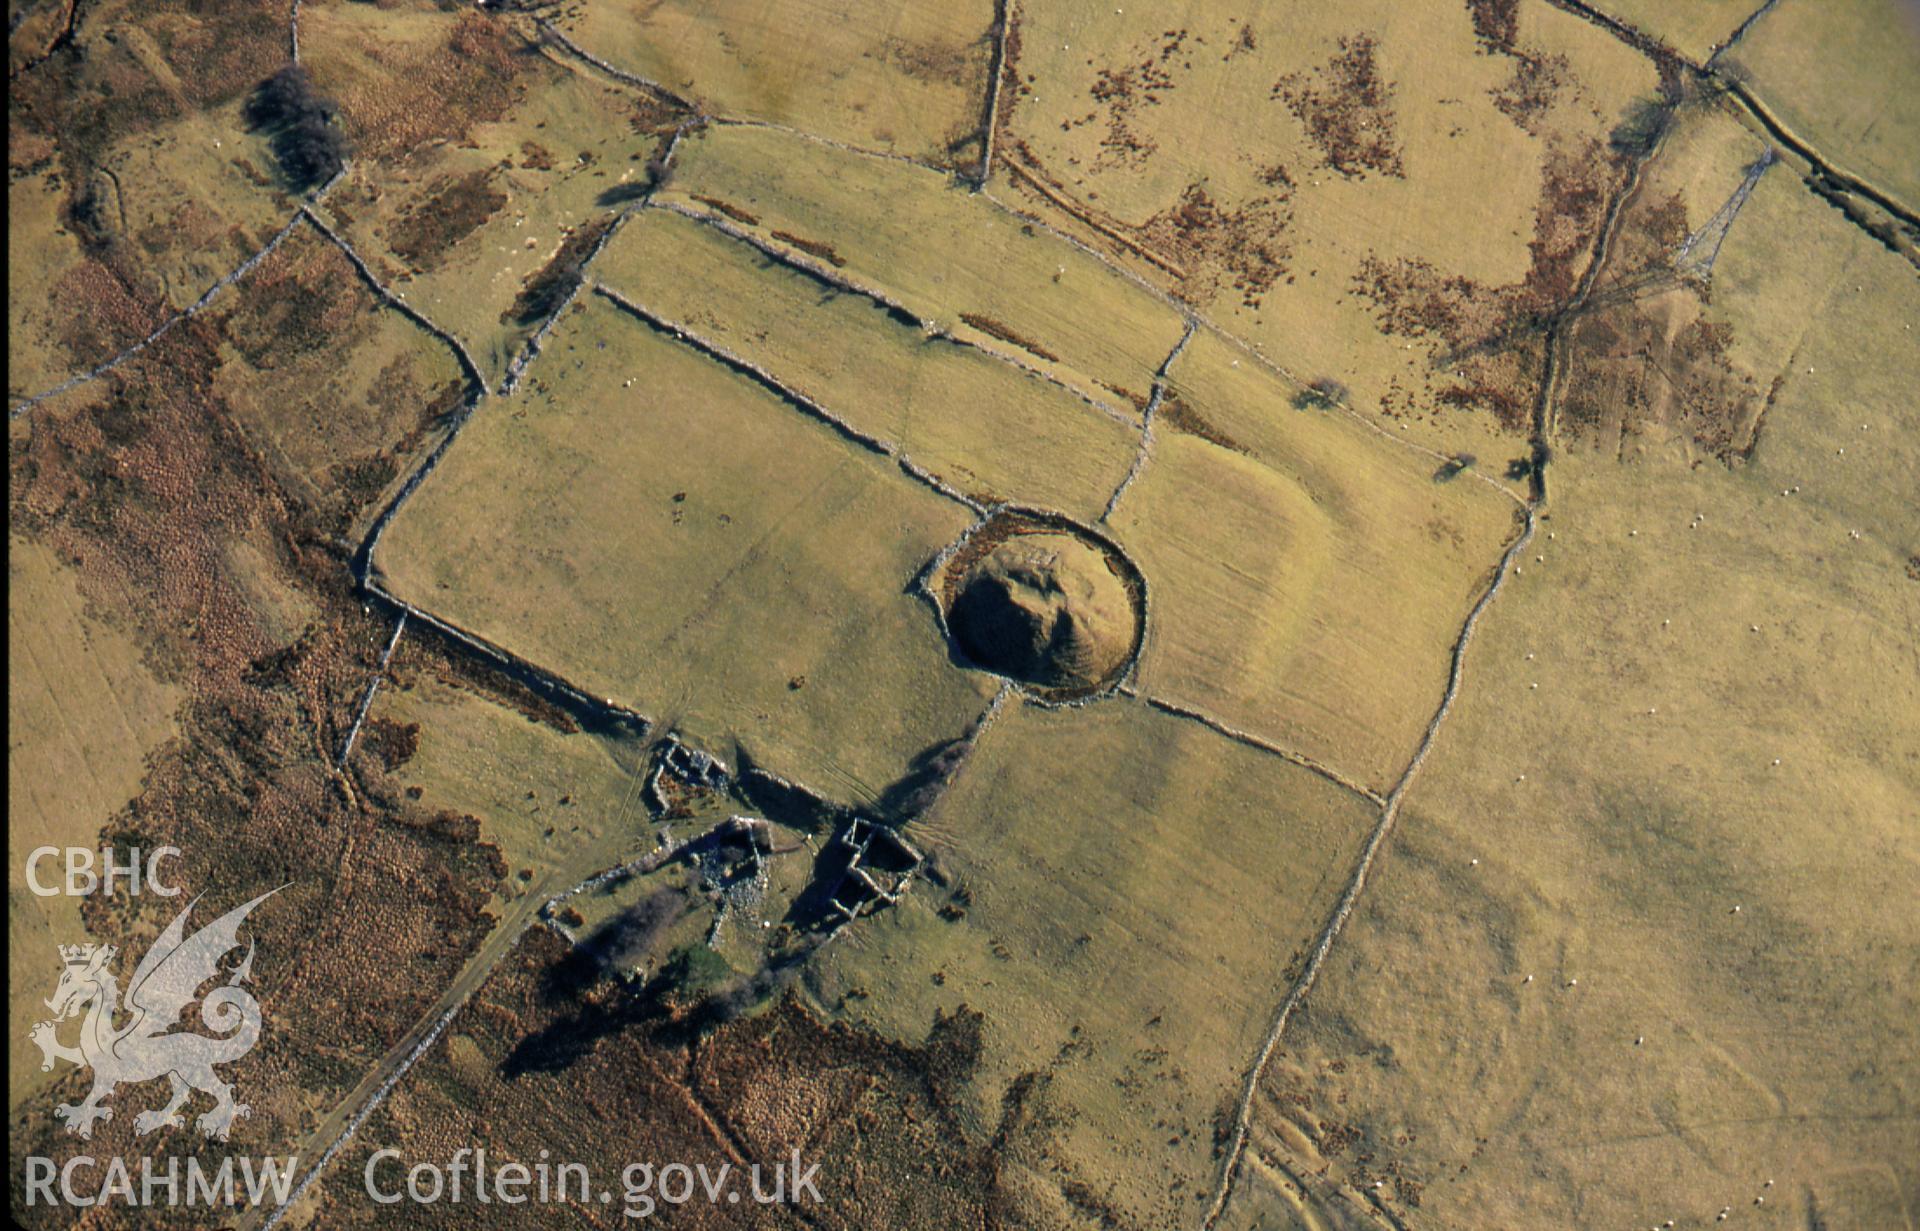 RCAHMW colour slide oblique aerial photograph of Tomen-y-mur (castell), Maentwrog, taken by C.R.Musson on the 30/03/1996